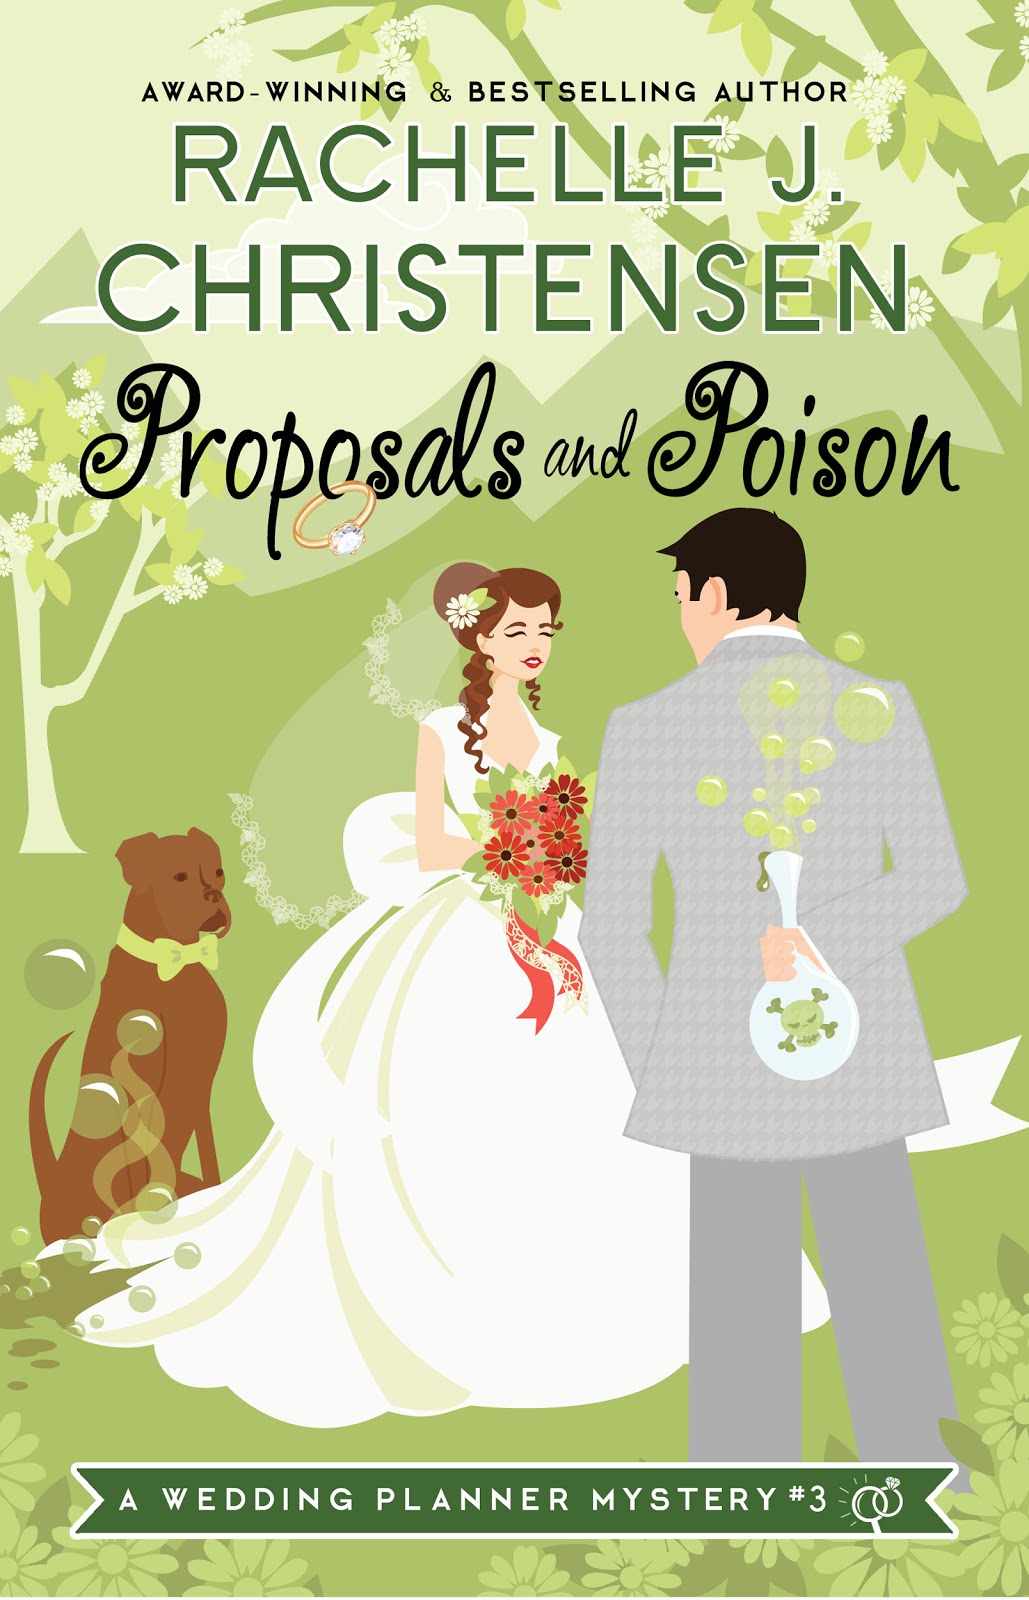 #3 in the Wedding Planner Mystery Series